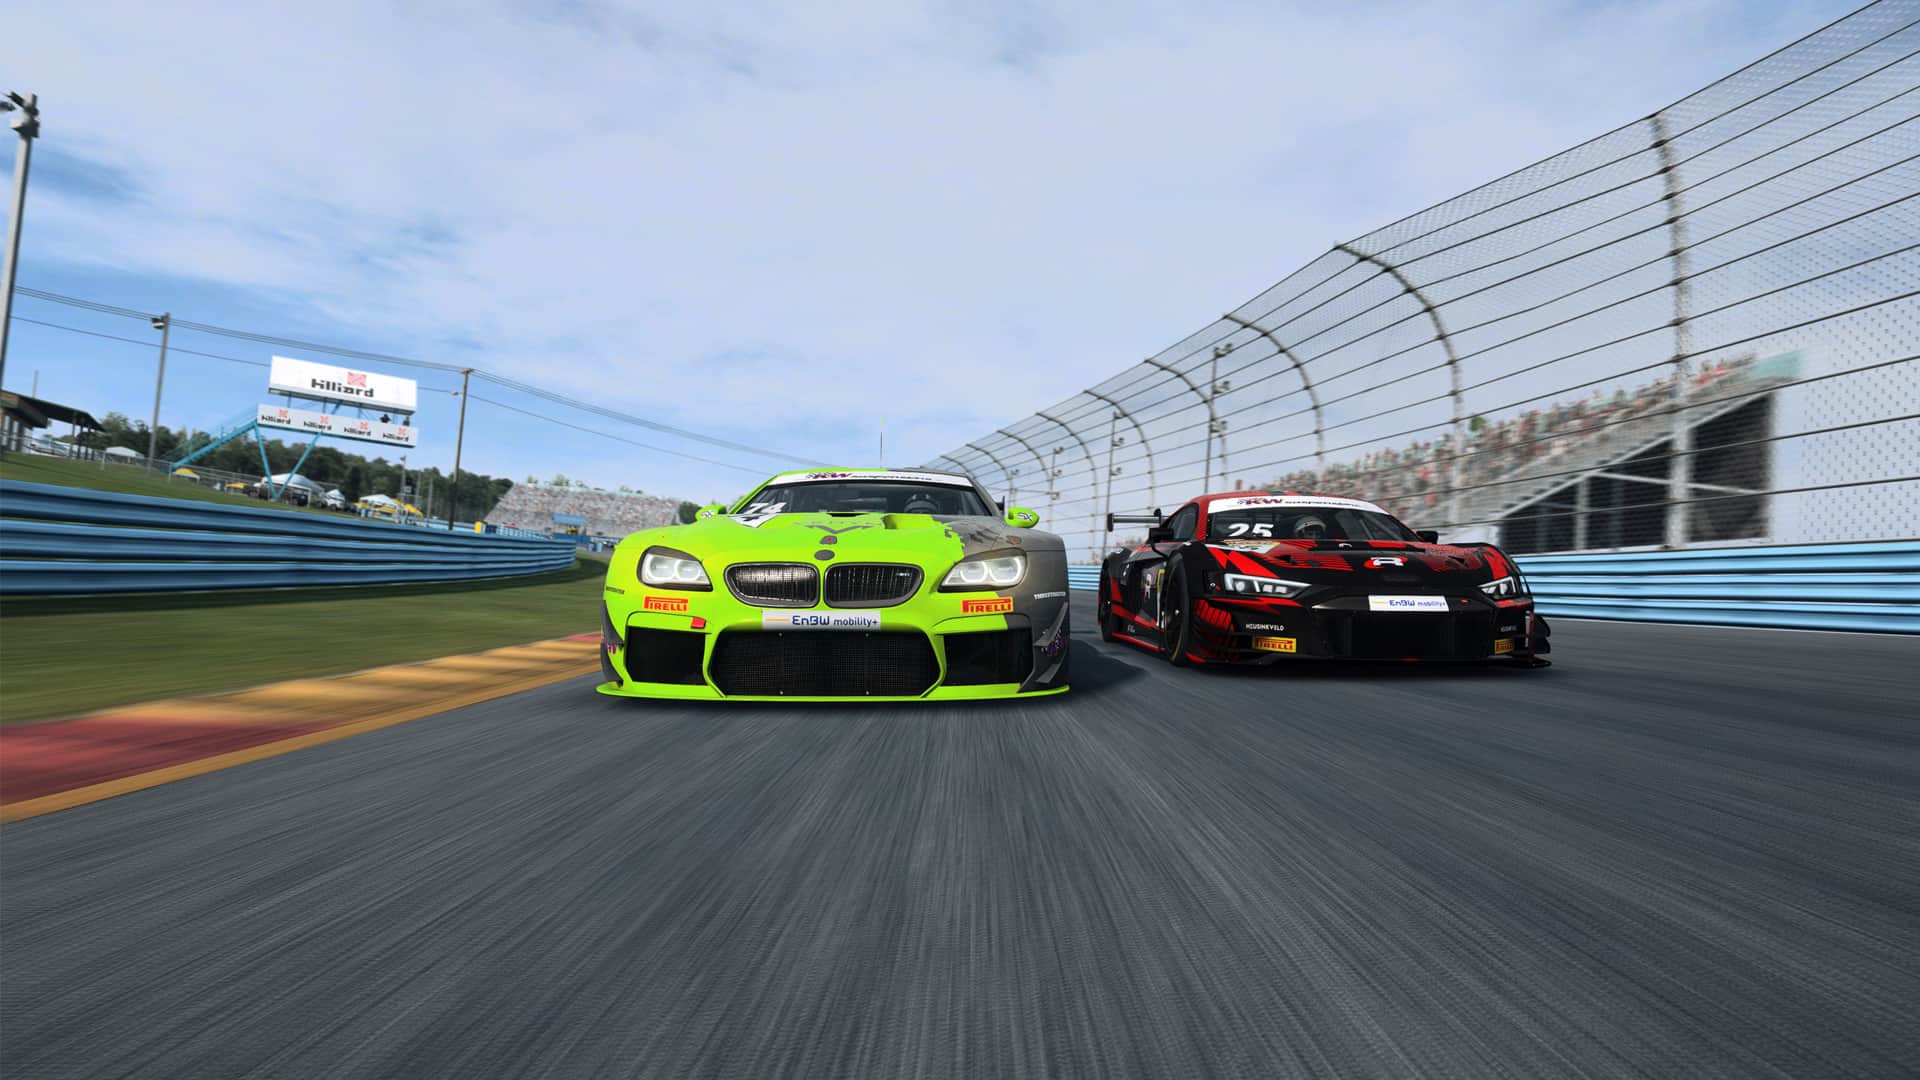 WATCH Round 2 of the 2022 ADAC GT Masters Esports Championship live Traxion